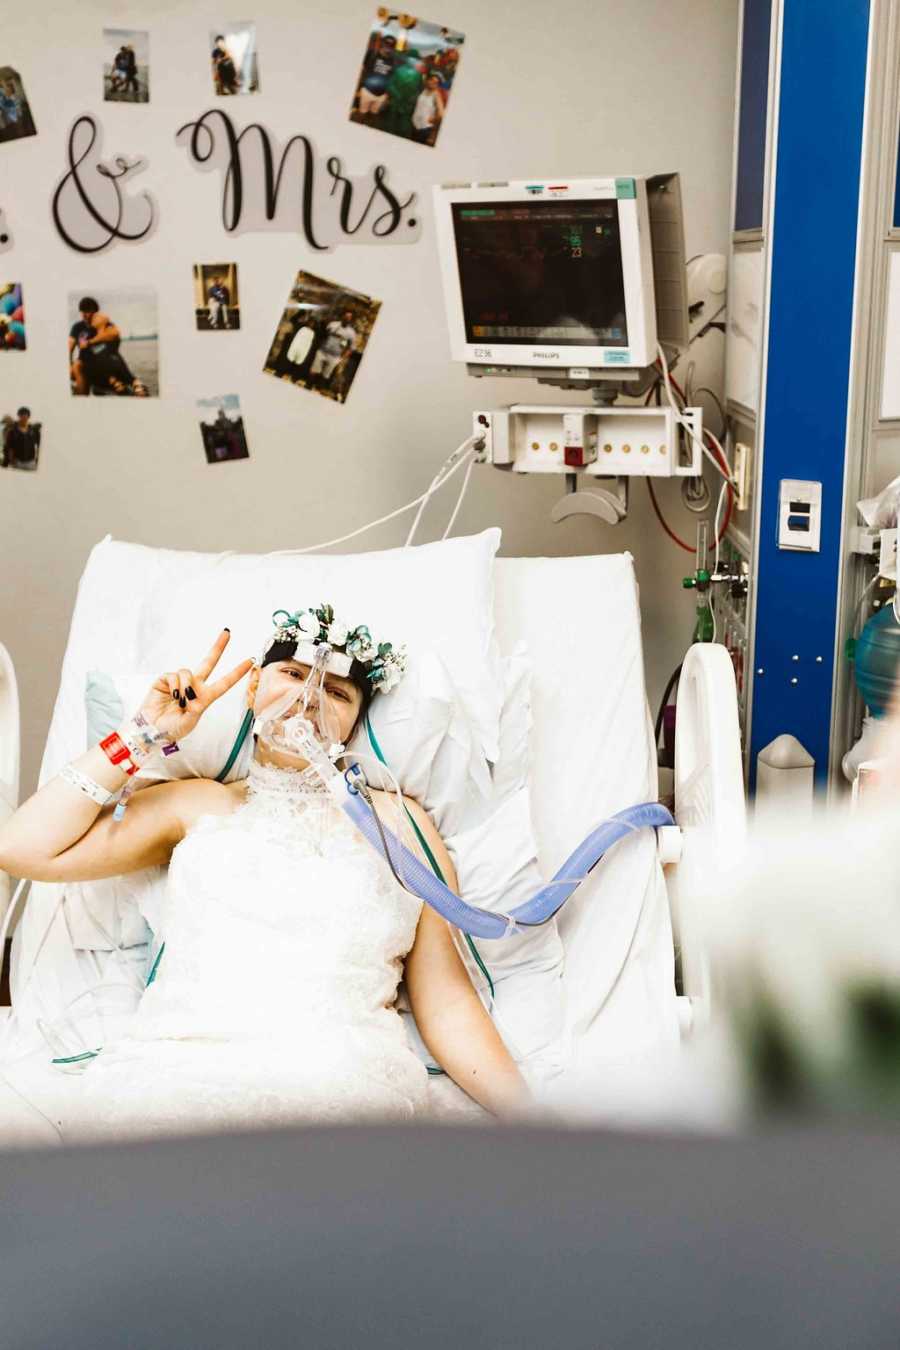 Teen bride with cancer lying in hospital bed holding up peace sign with pictures on wall behind her